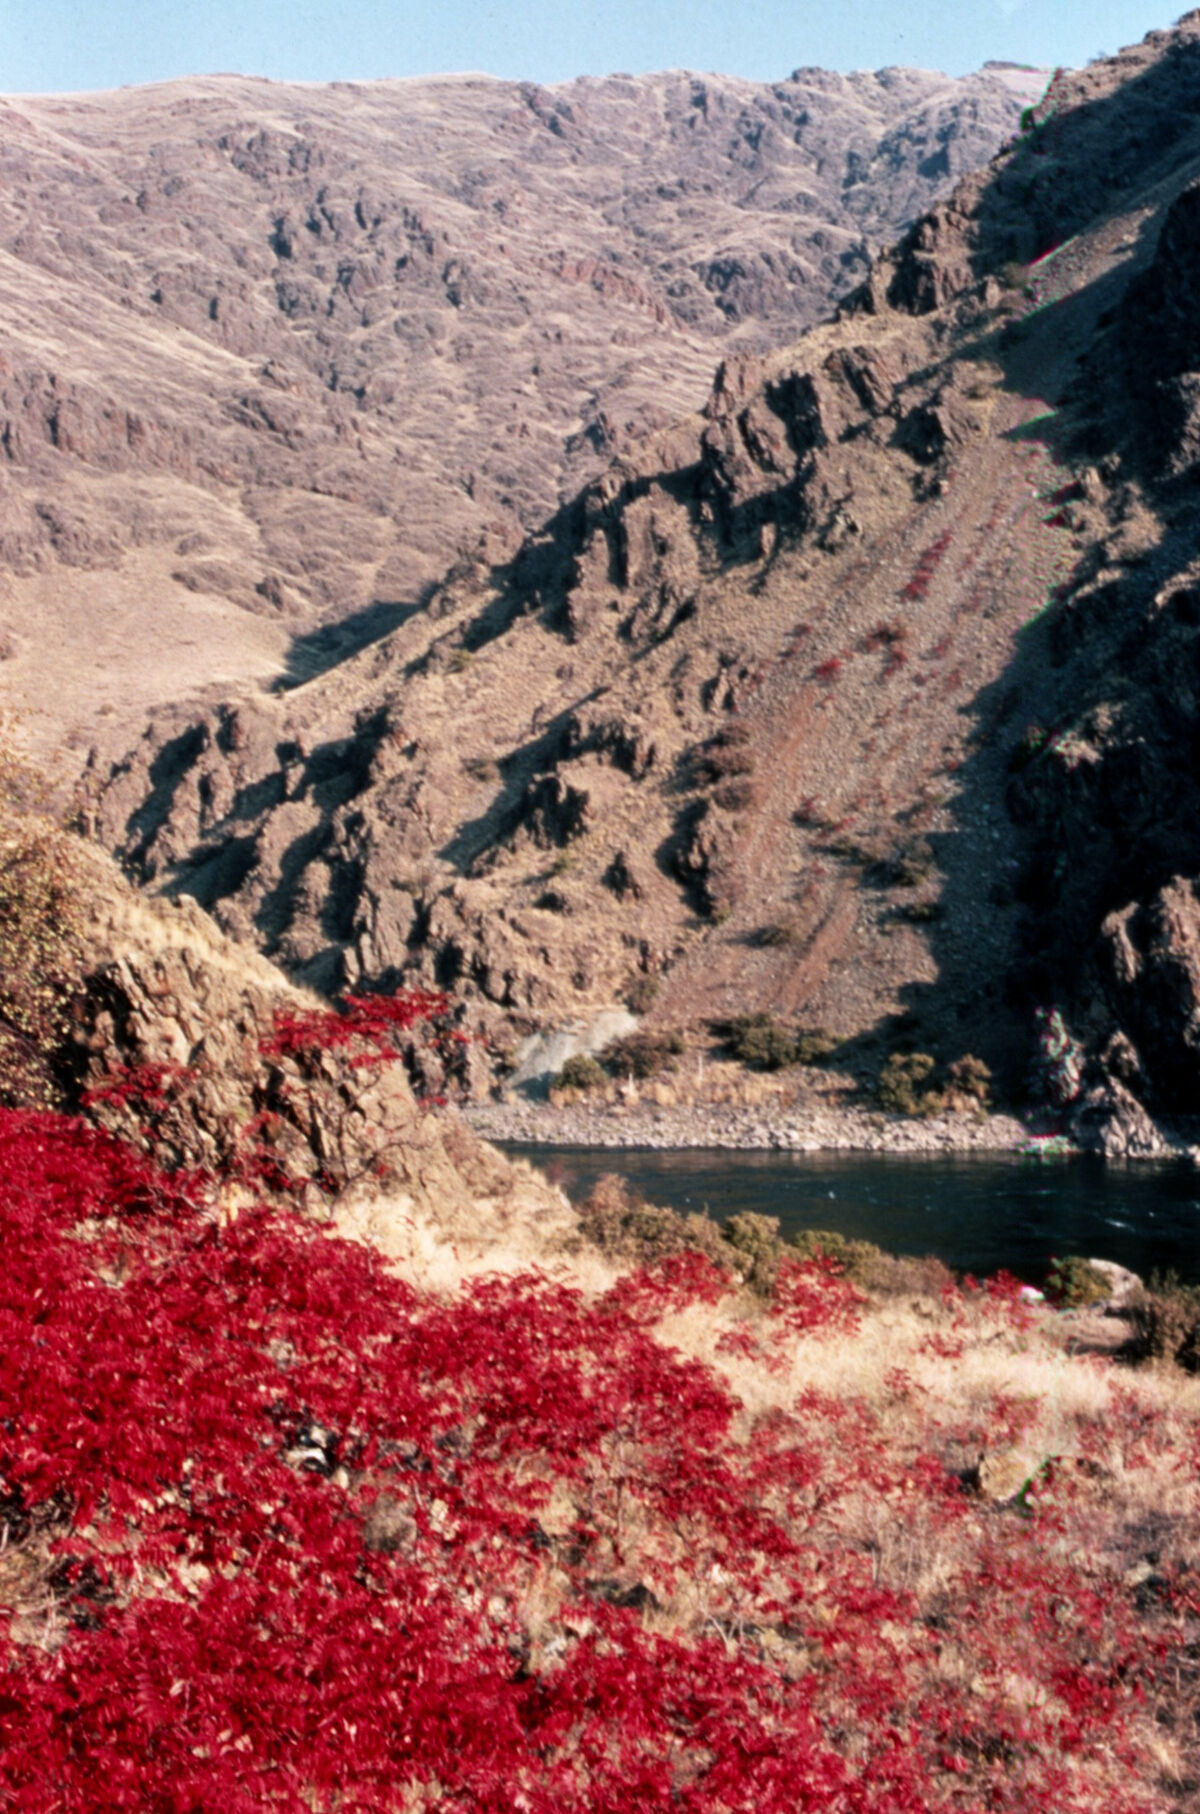 Photo taken upstream from Dug Bar on the Snake River, not far from the site of the Deep Creek massacre of Chinese miners. This is a cropped version of slide 261. Taken by Janie Tippett.